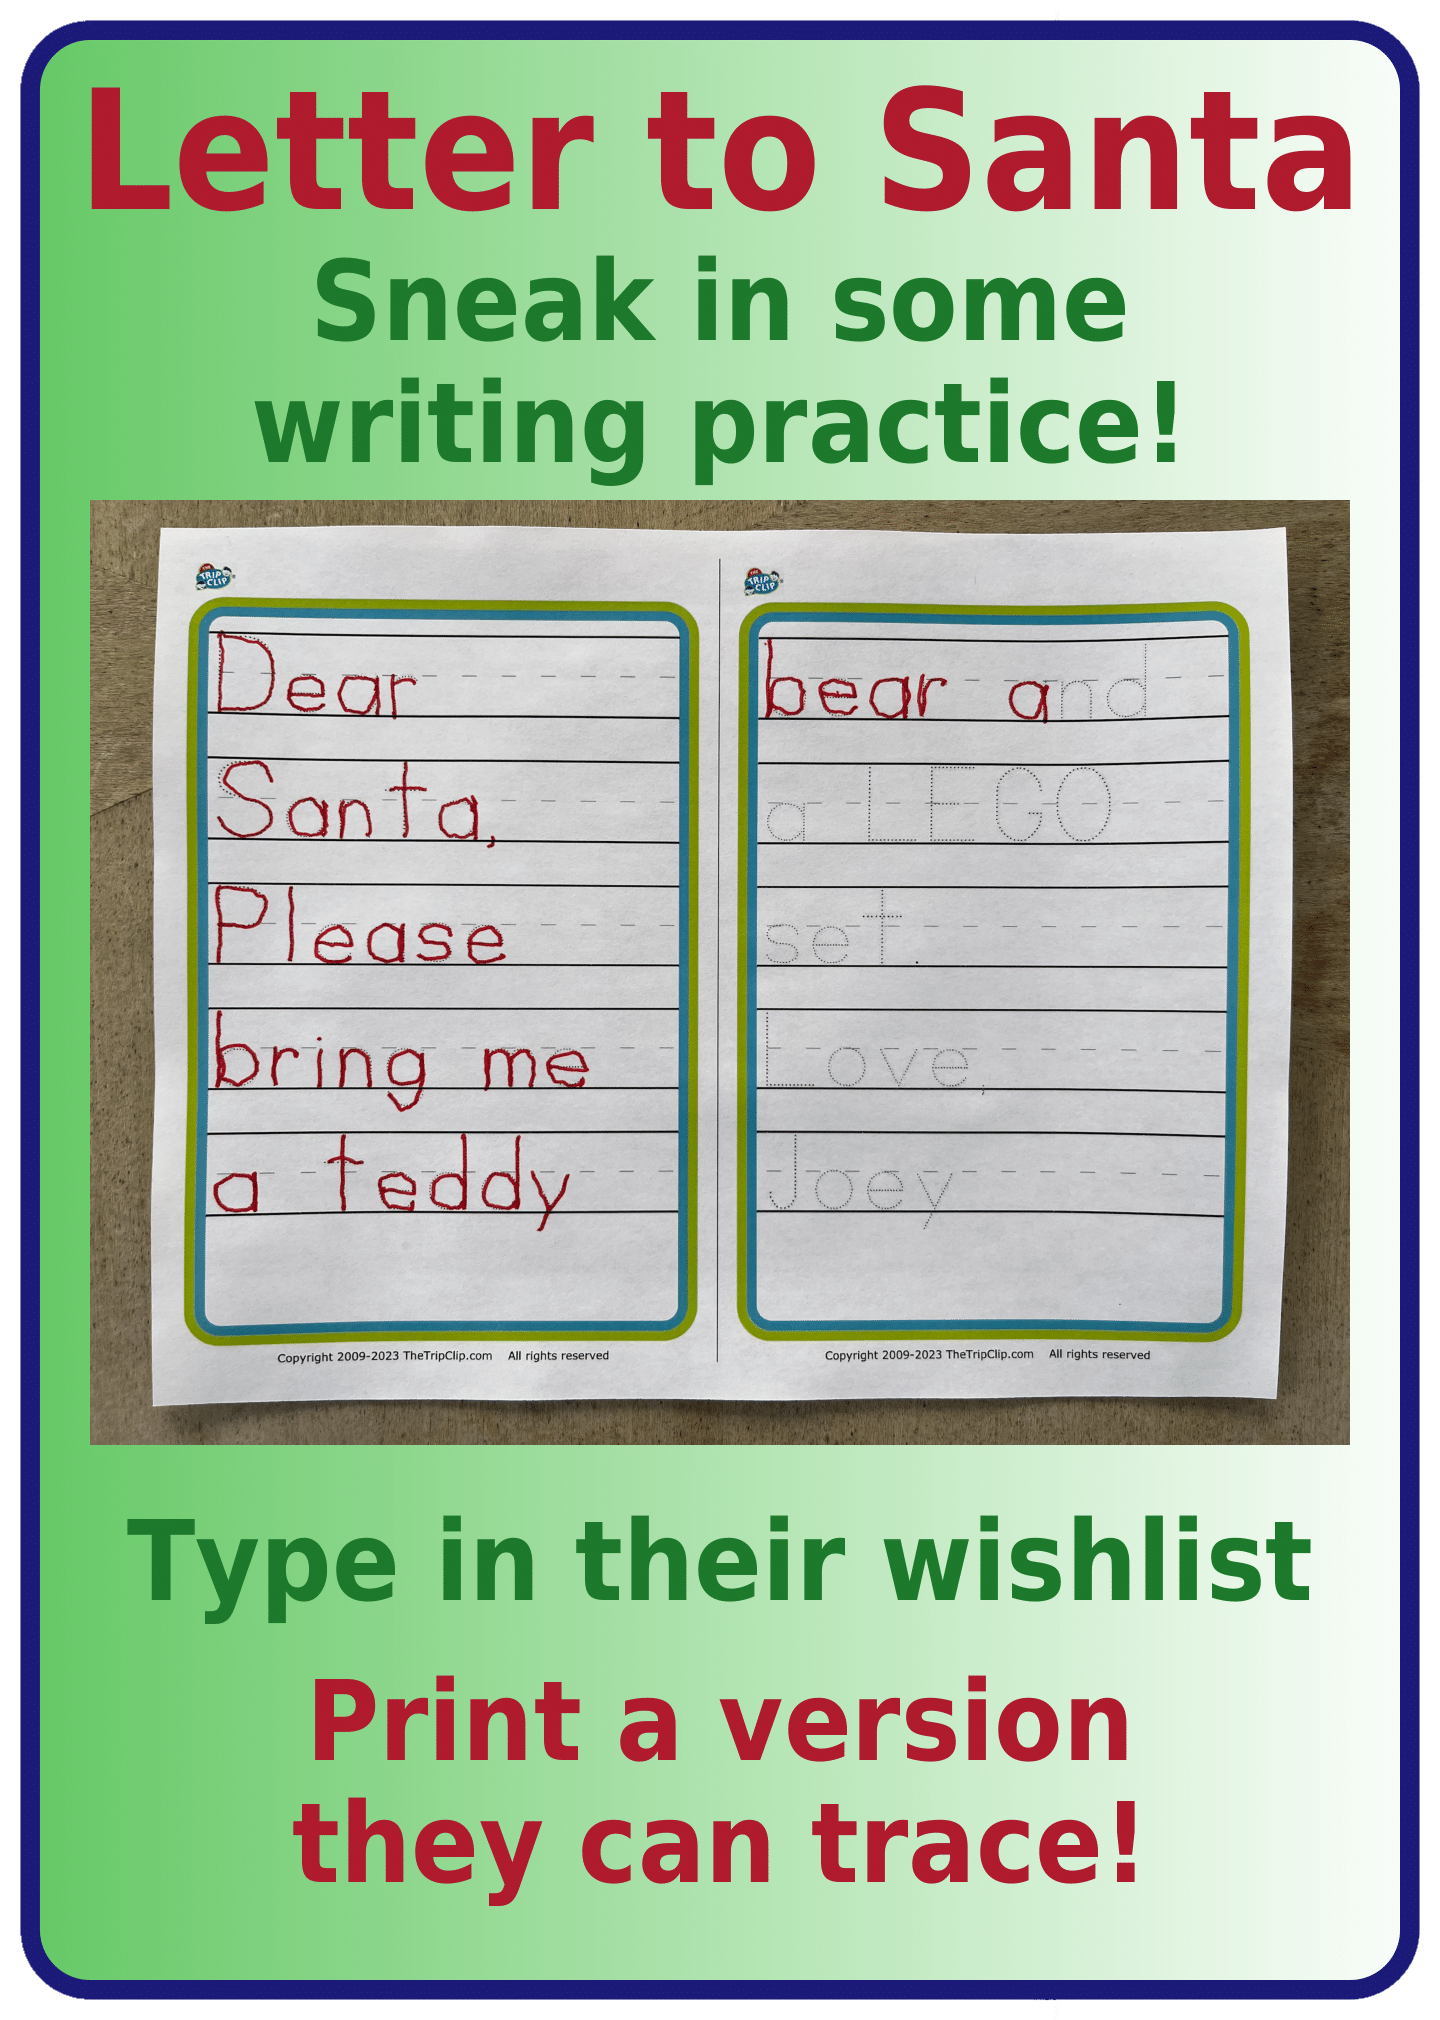 Sample letter to santa with dotted letters for tracing